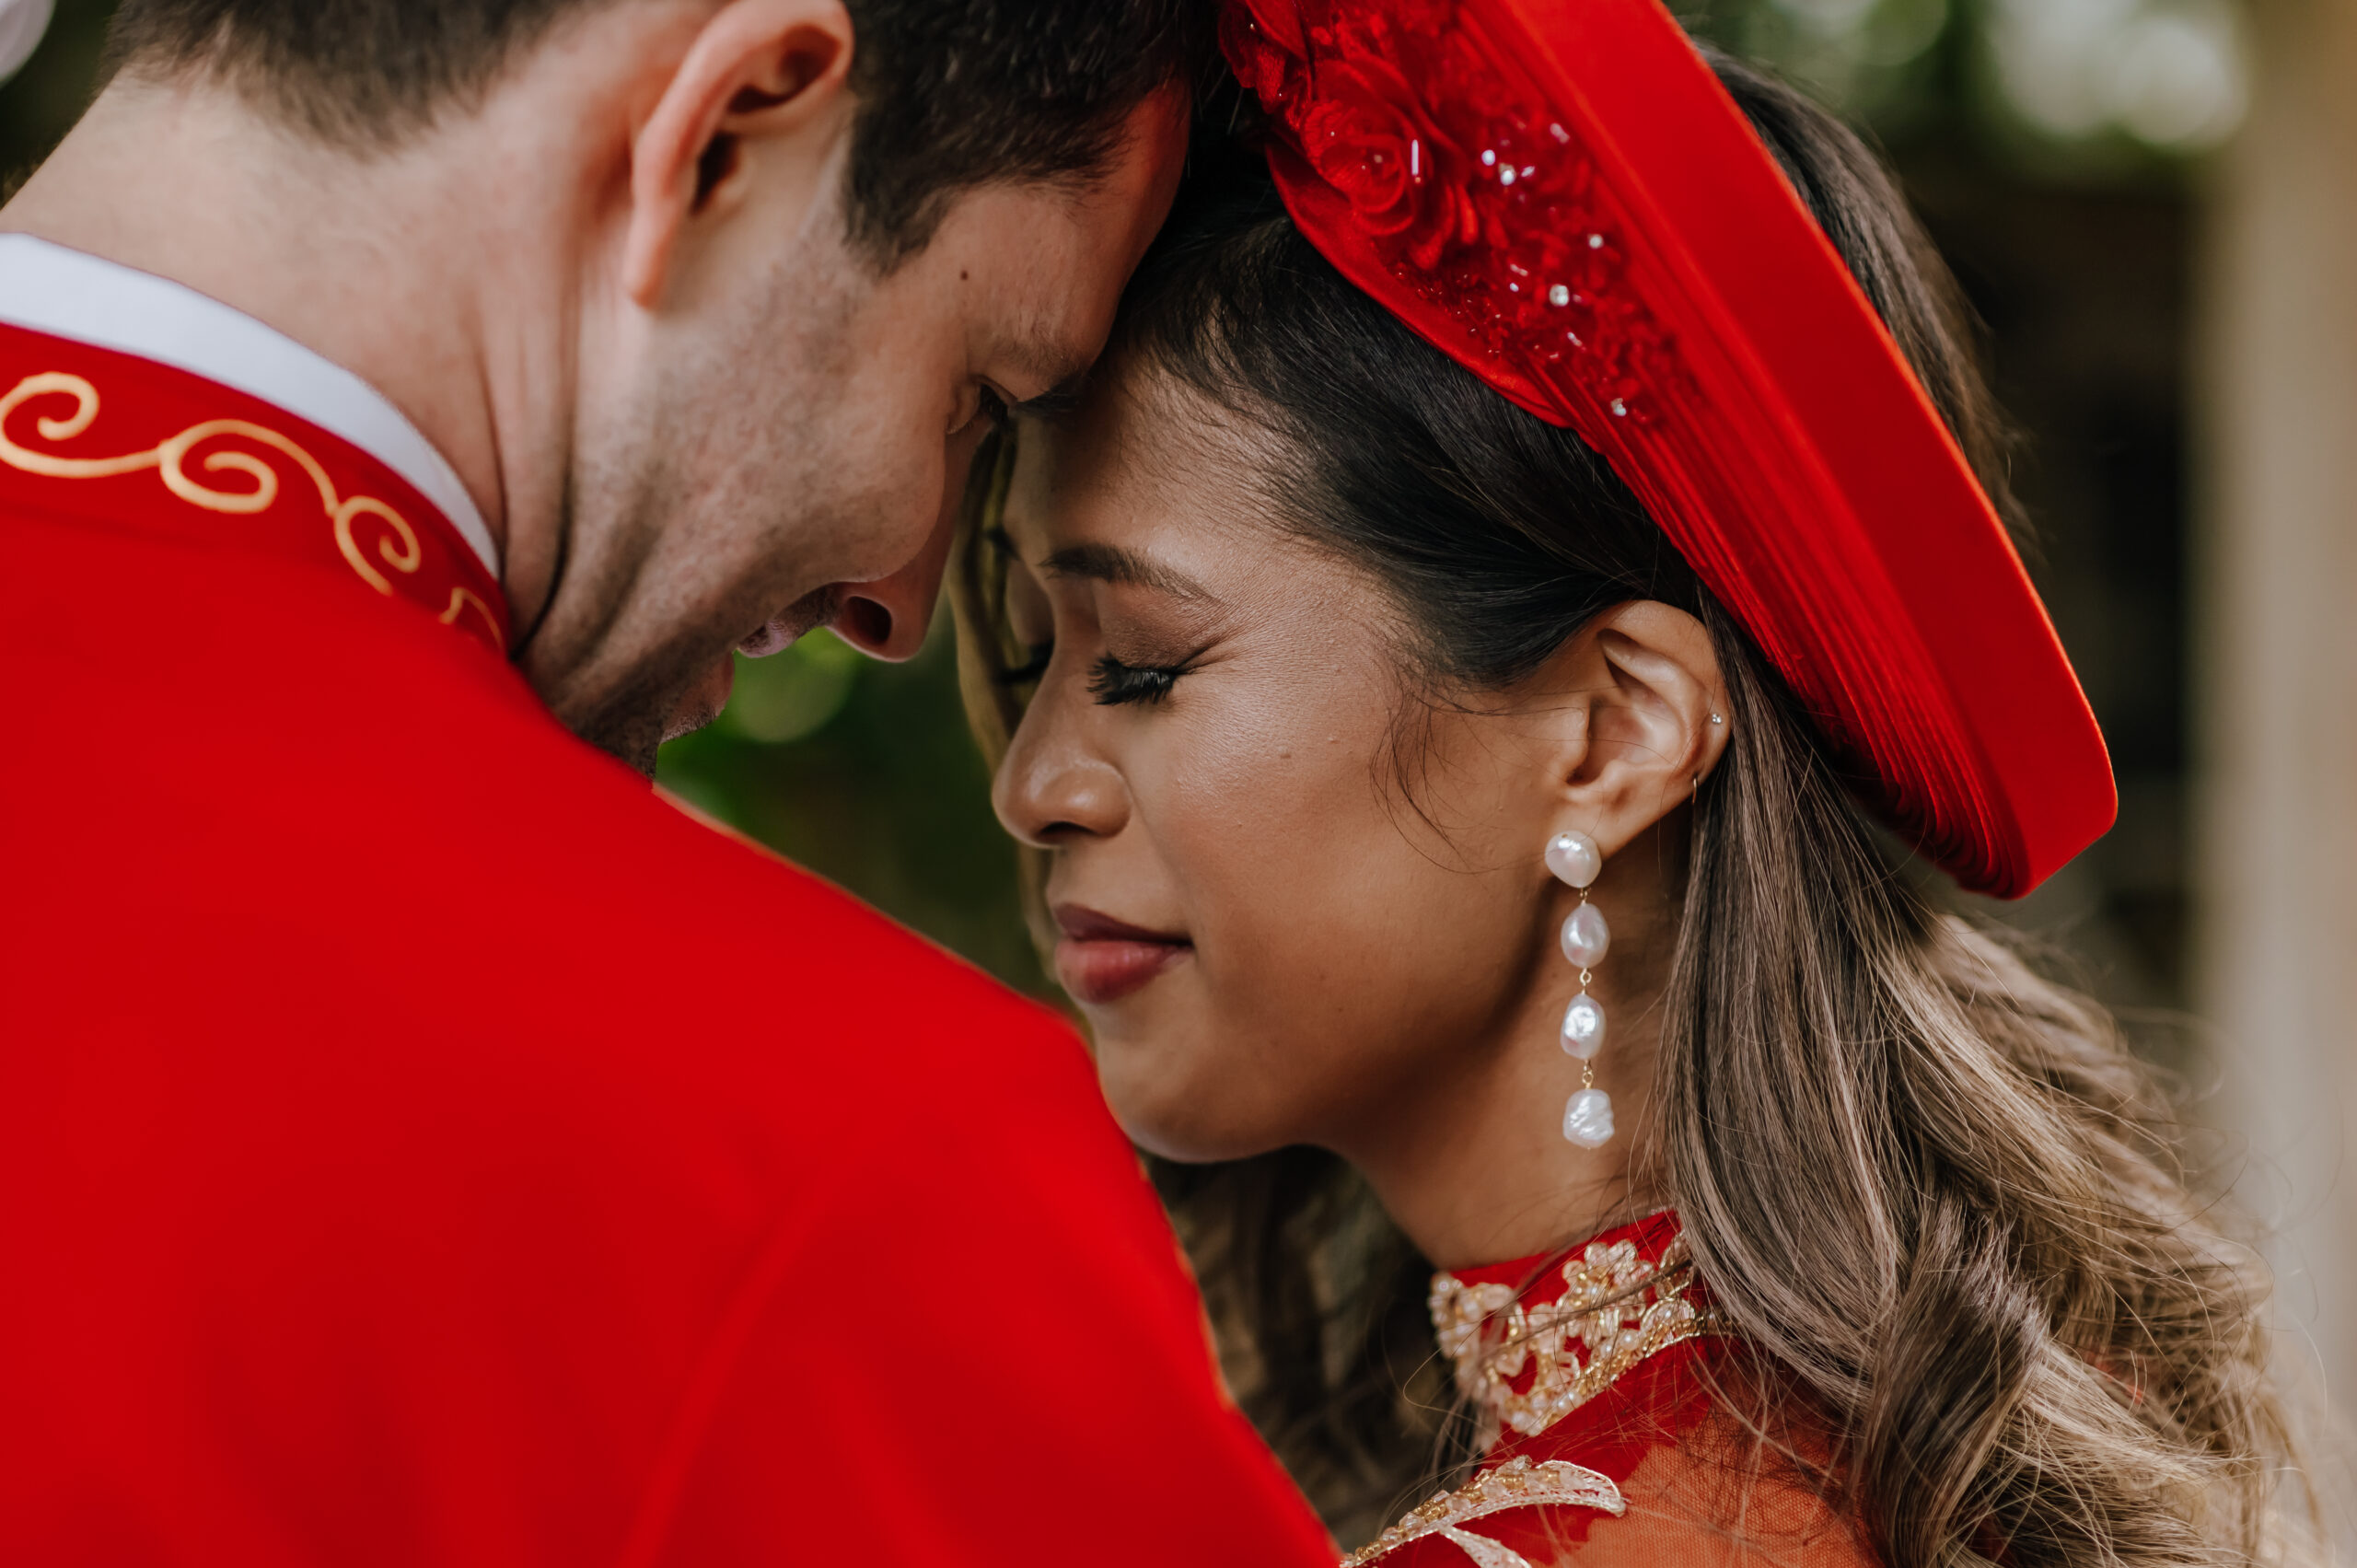 A couple rest their foreheads together with closed eyes while wearing traditional red ao gam and ao dai (Vietnamese wedding attire)